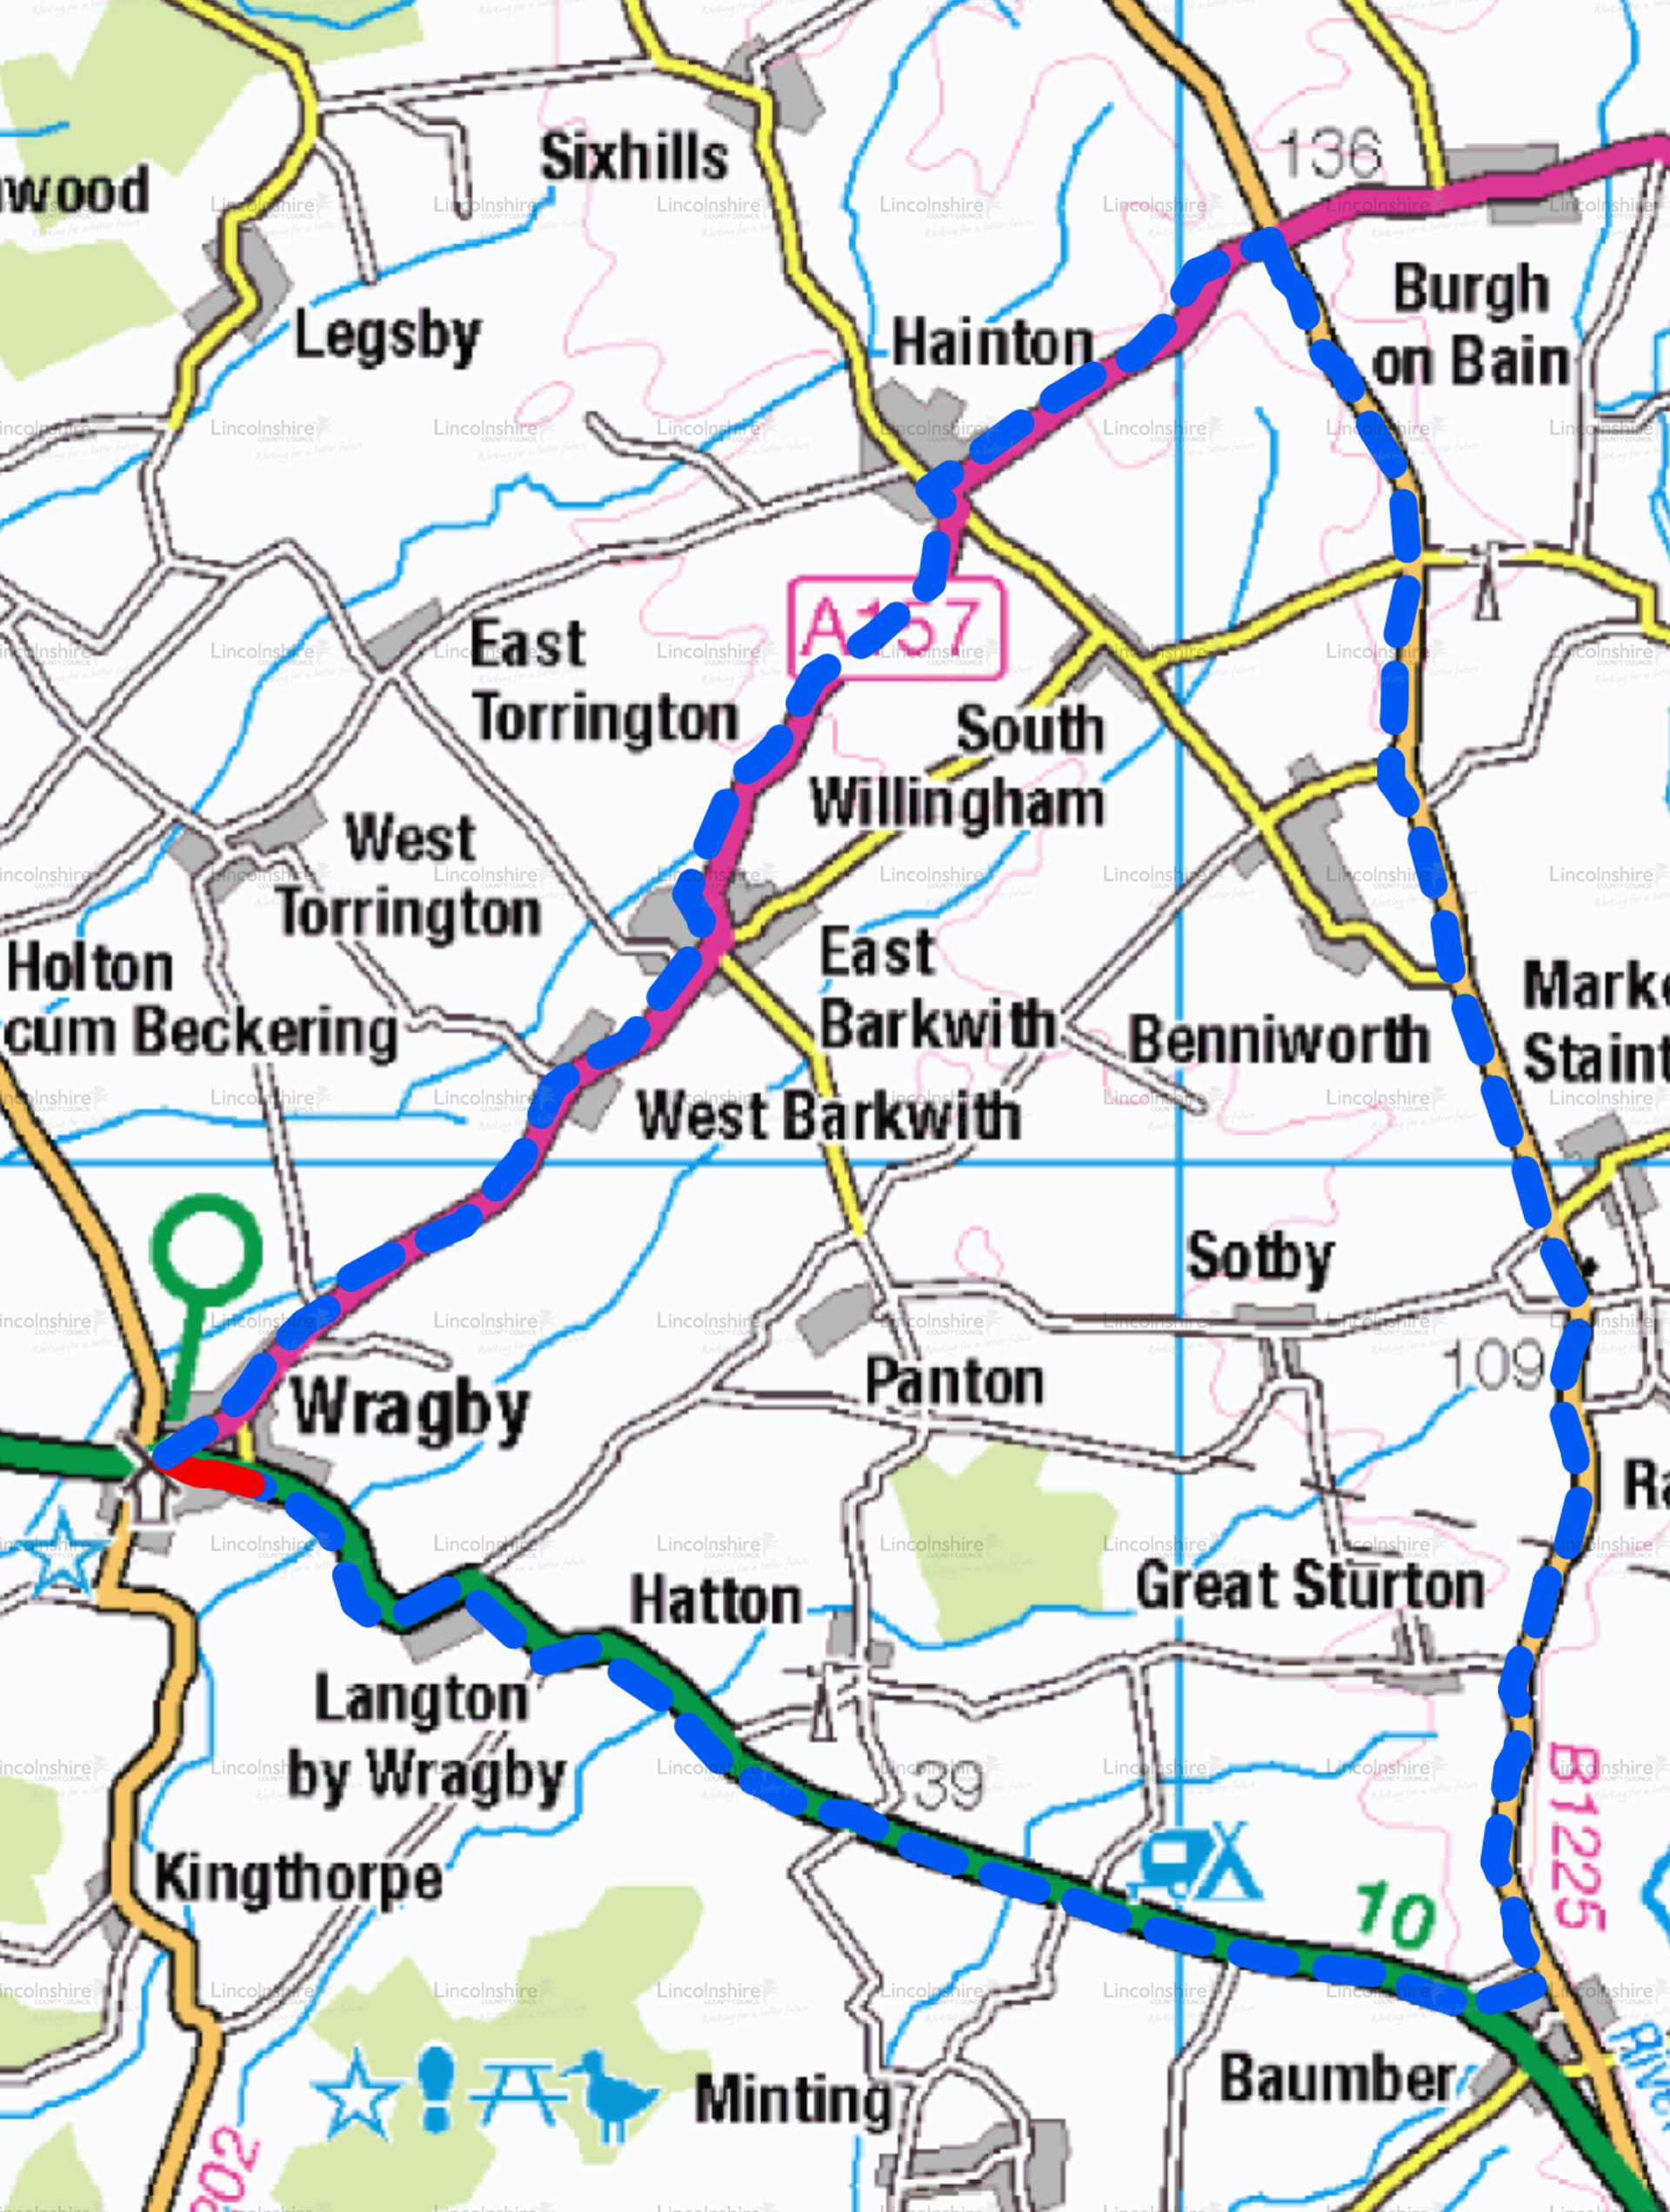 Diversion Route - Wragby - Page